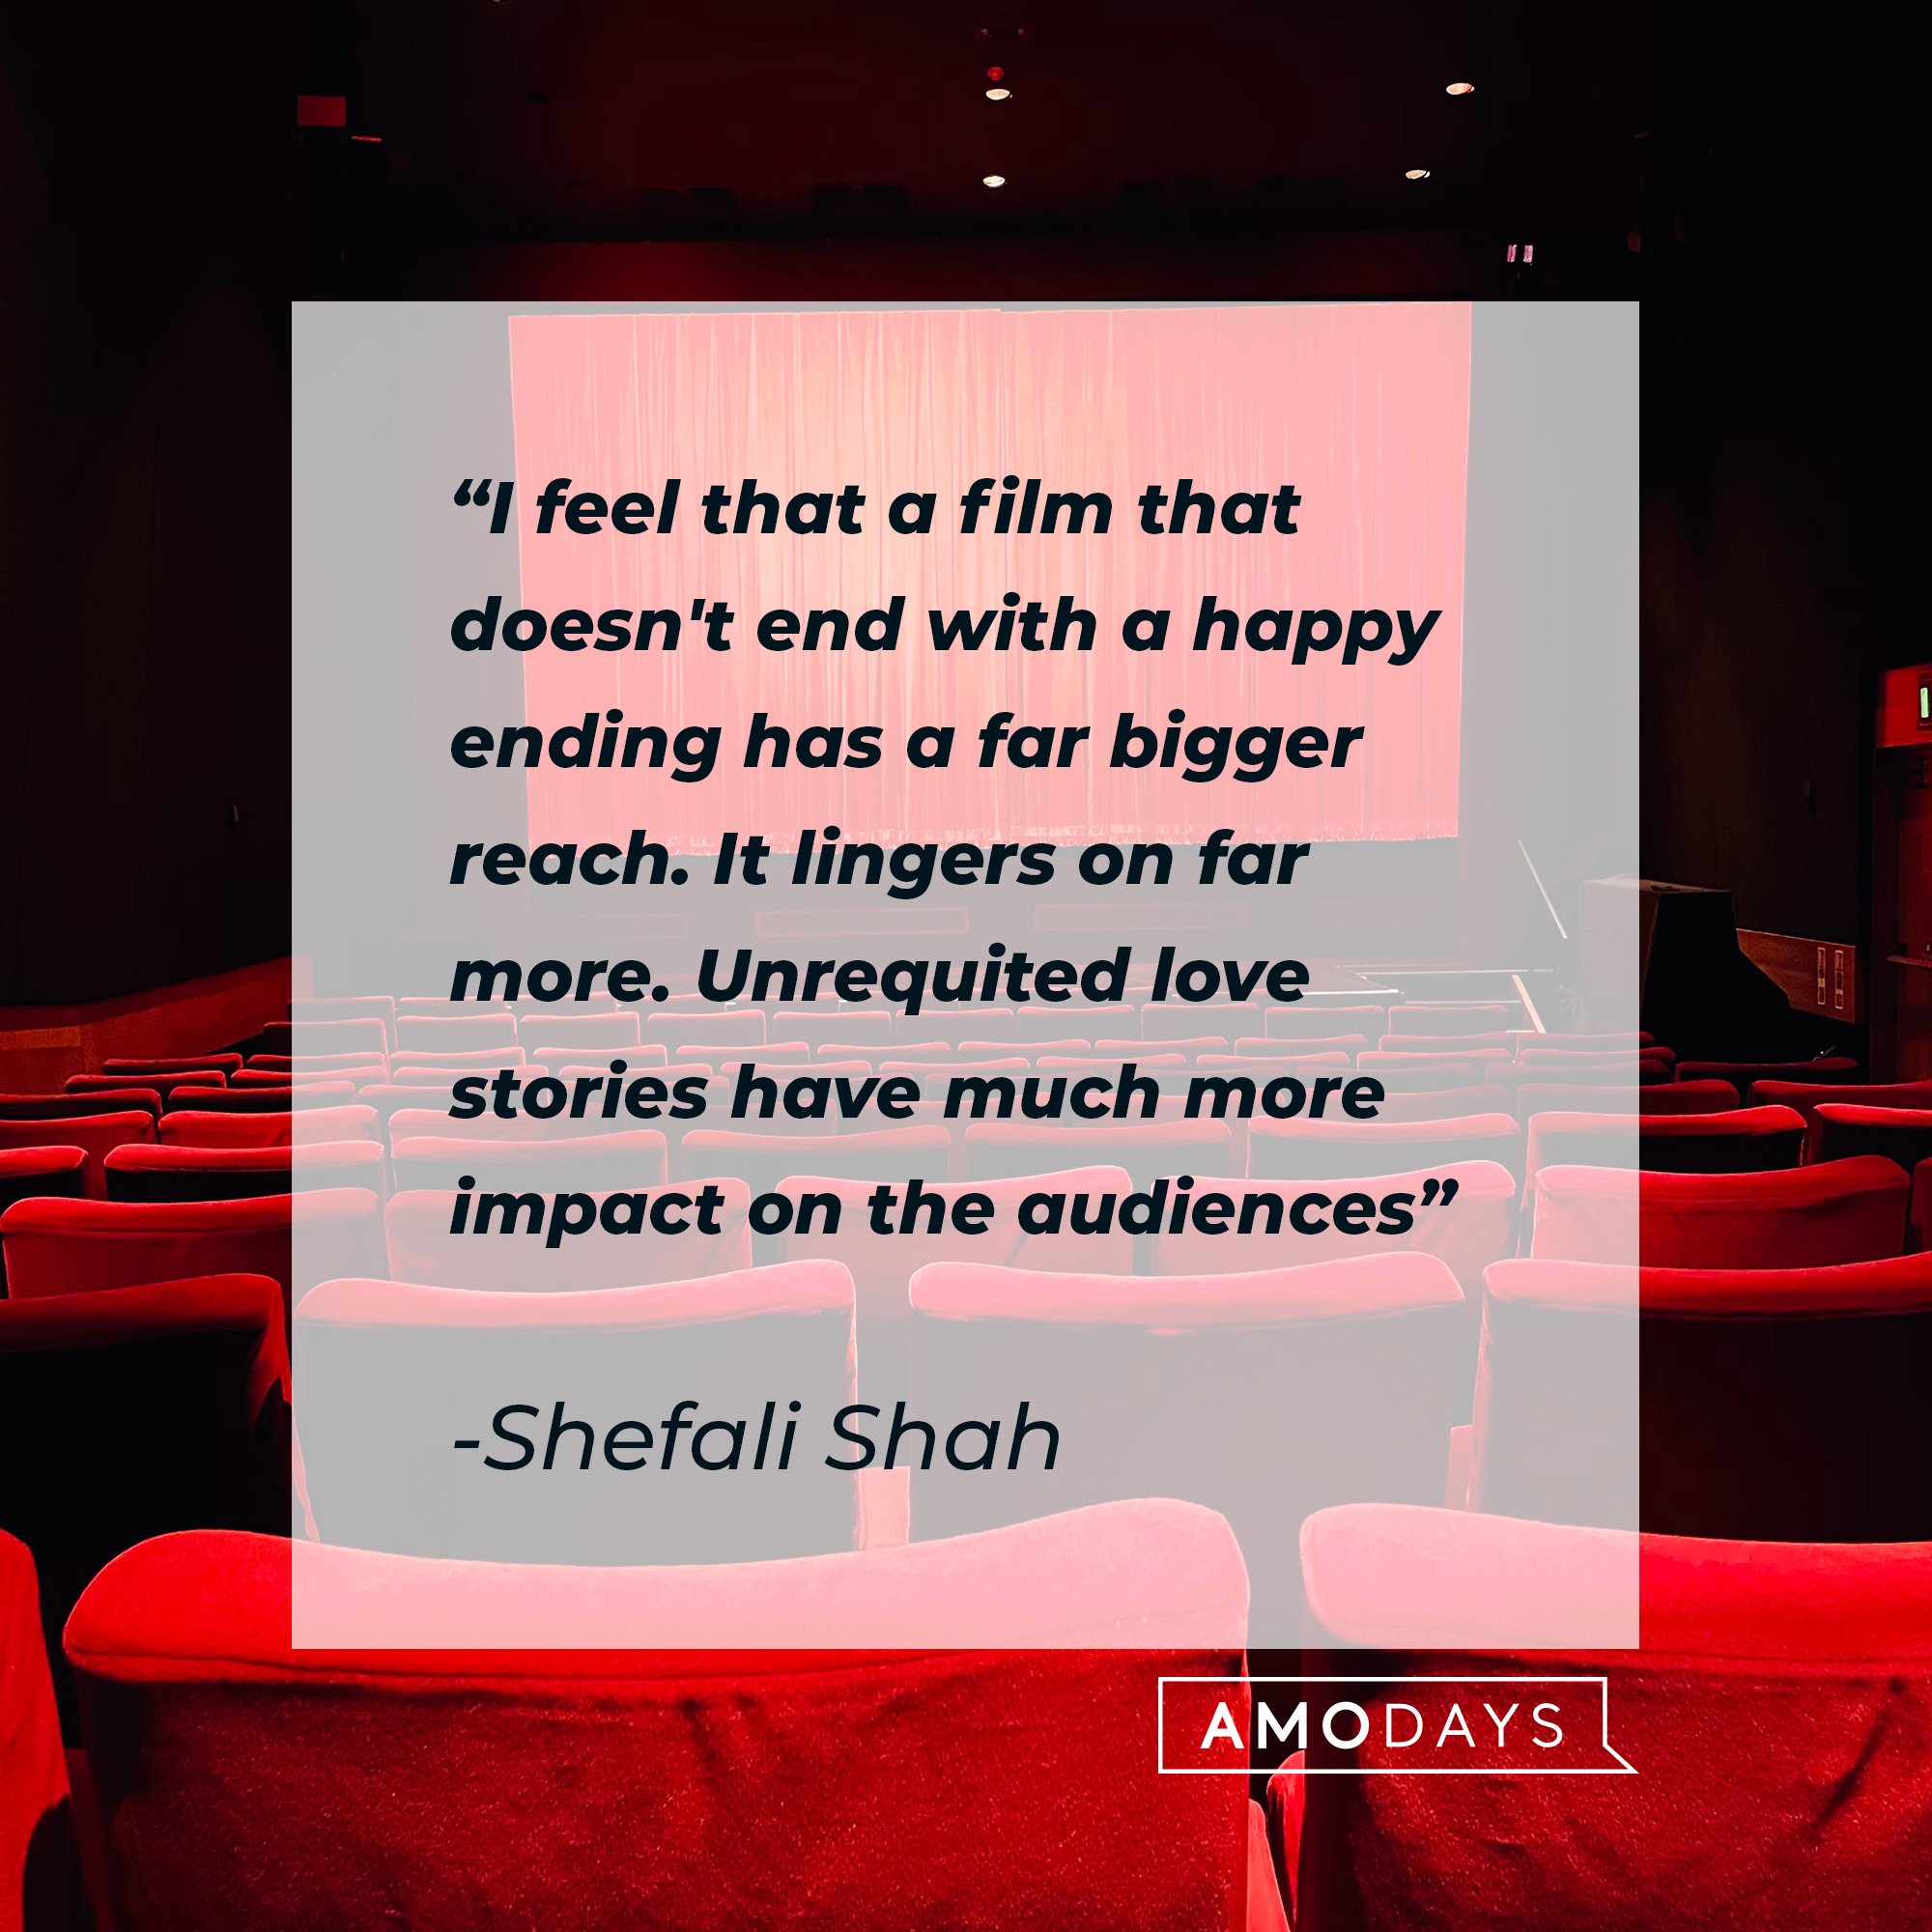 Shefali Shah’s quote: "I feel that a film that doesn't end with a happy ending has a far bigger reach. It lingers on far more. Unrequited love stories have much more impact on the audiences" | Image: AmoDays